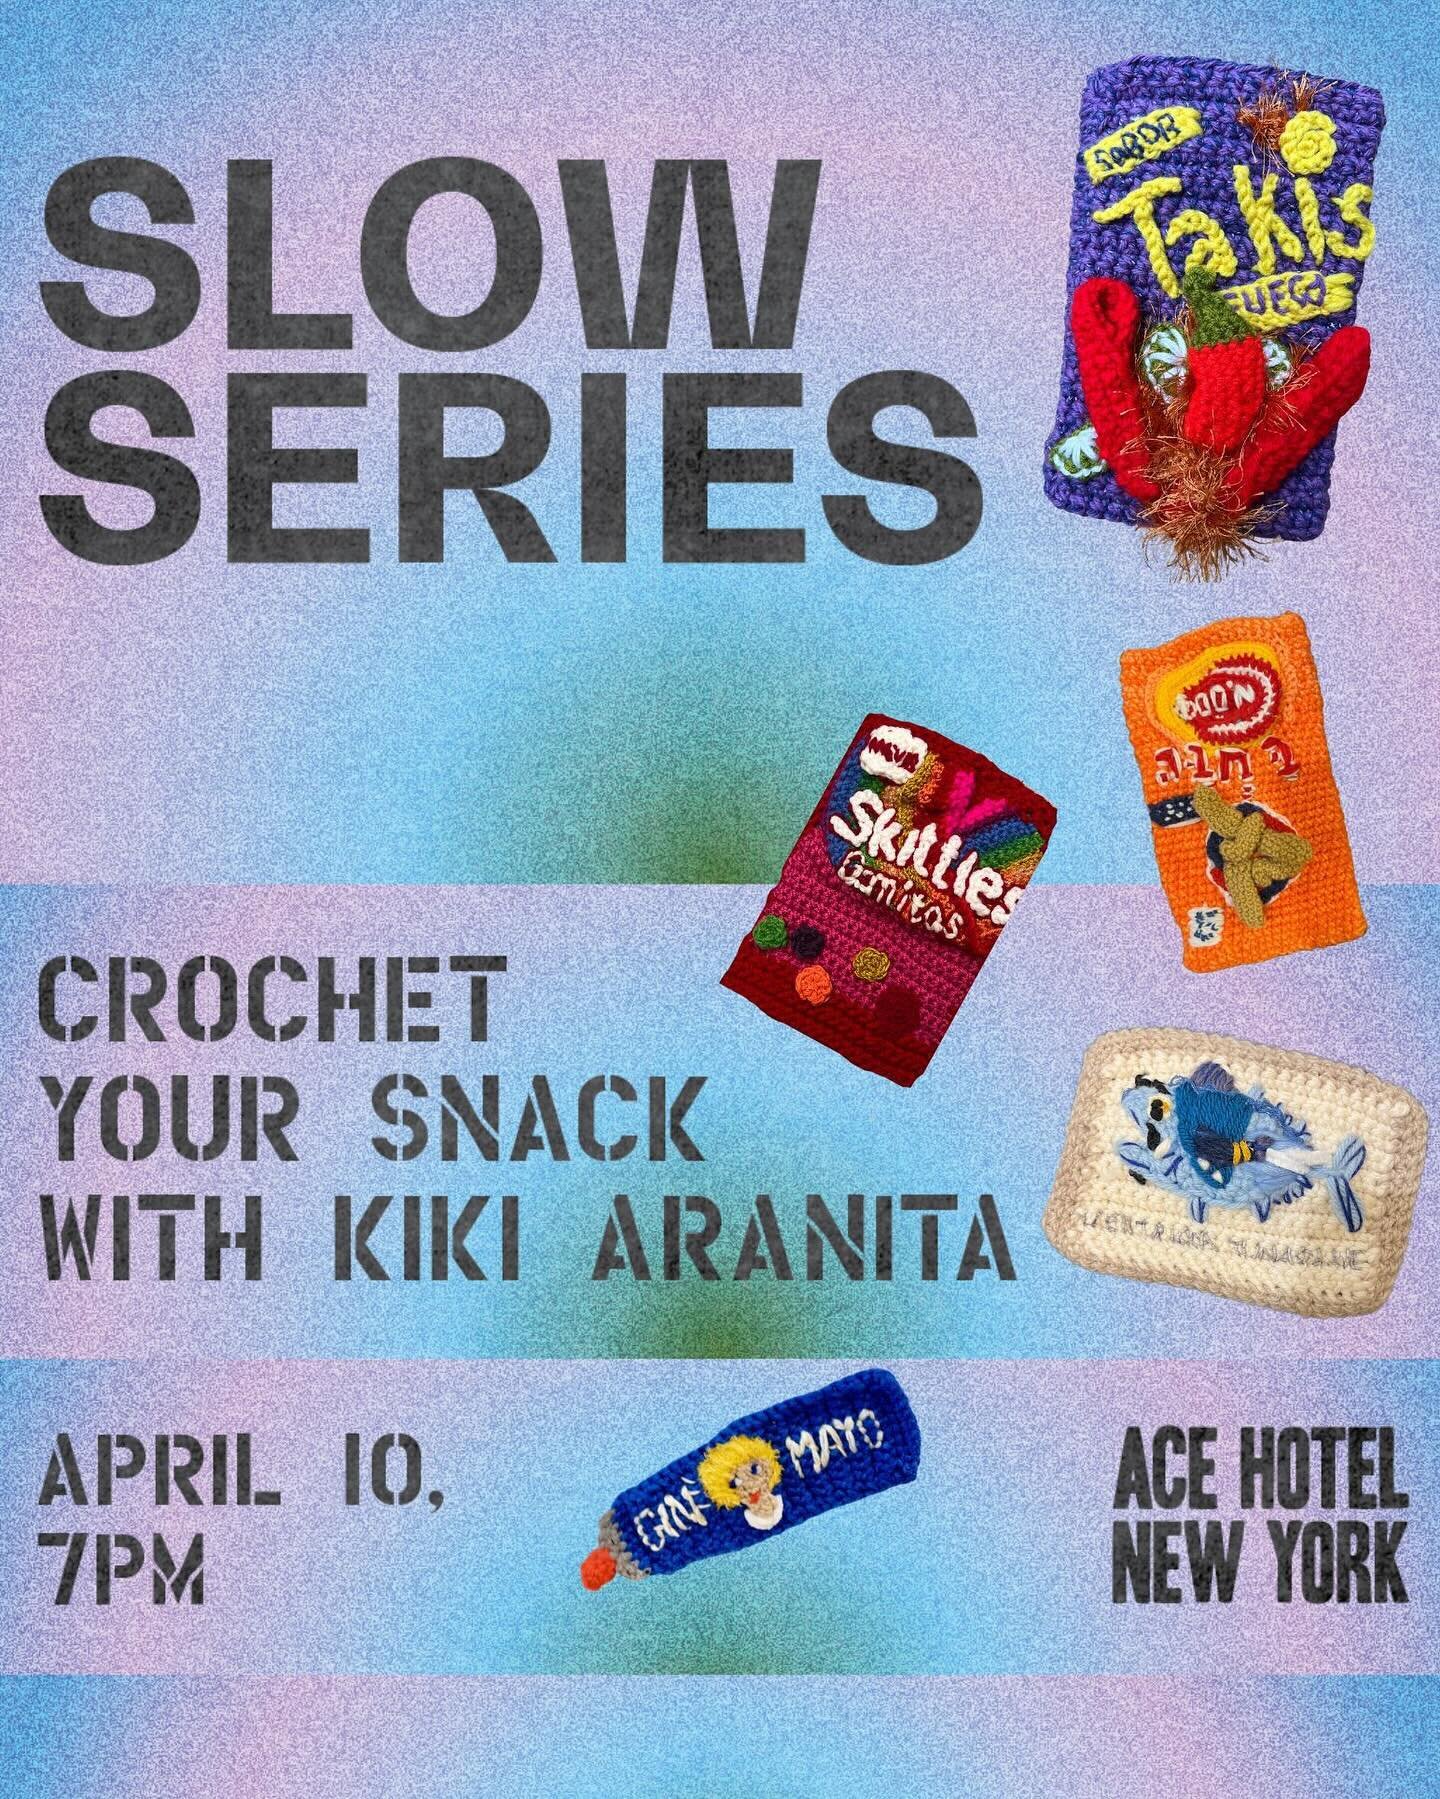 Kiki is giving a crochet your snack workshop this Wednesday 4/10 at the Ace Hotel New York. Grab a spot, link in bio. 

@kikiaranita @acehotelnewyork 

Learn to freehand crochet and create 3D fiber art at a Slow Series class led by acclaimed Fiber ar